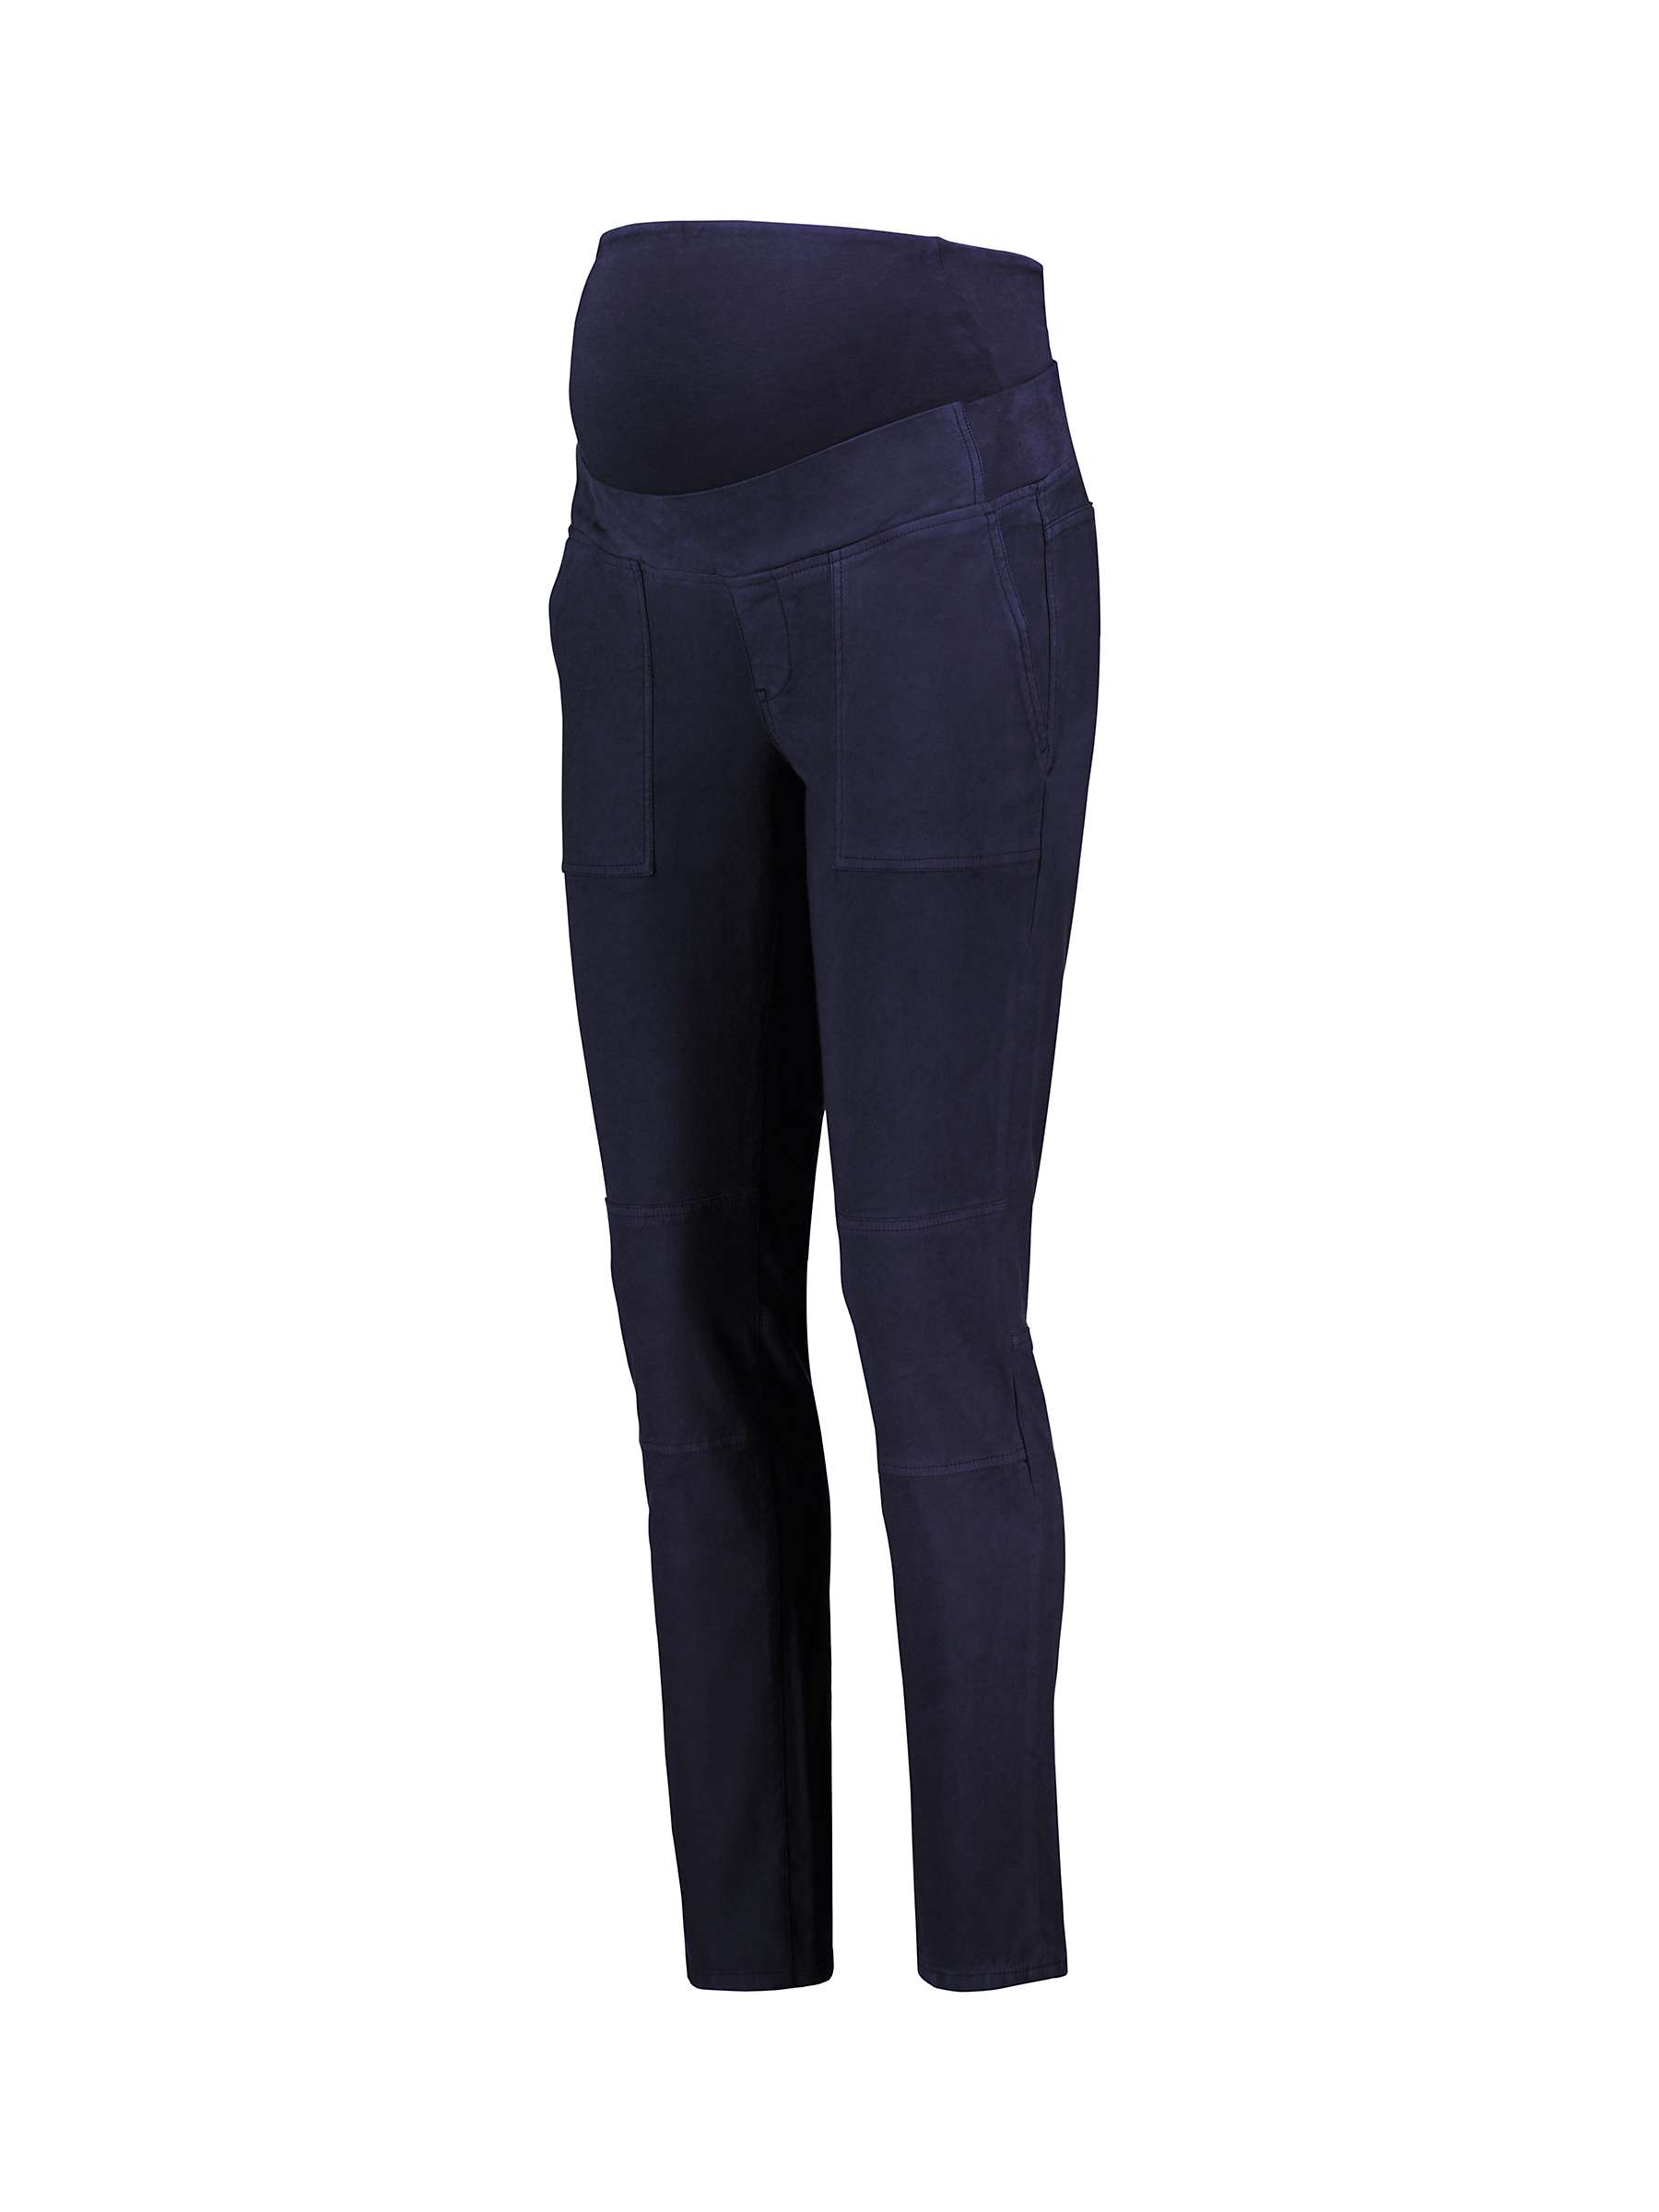 Buy Isabella Oliver Finlay Maternity Organic Cotton Trousers, Classic Navy Online at johnlewis.com